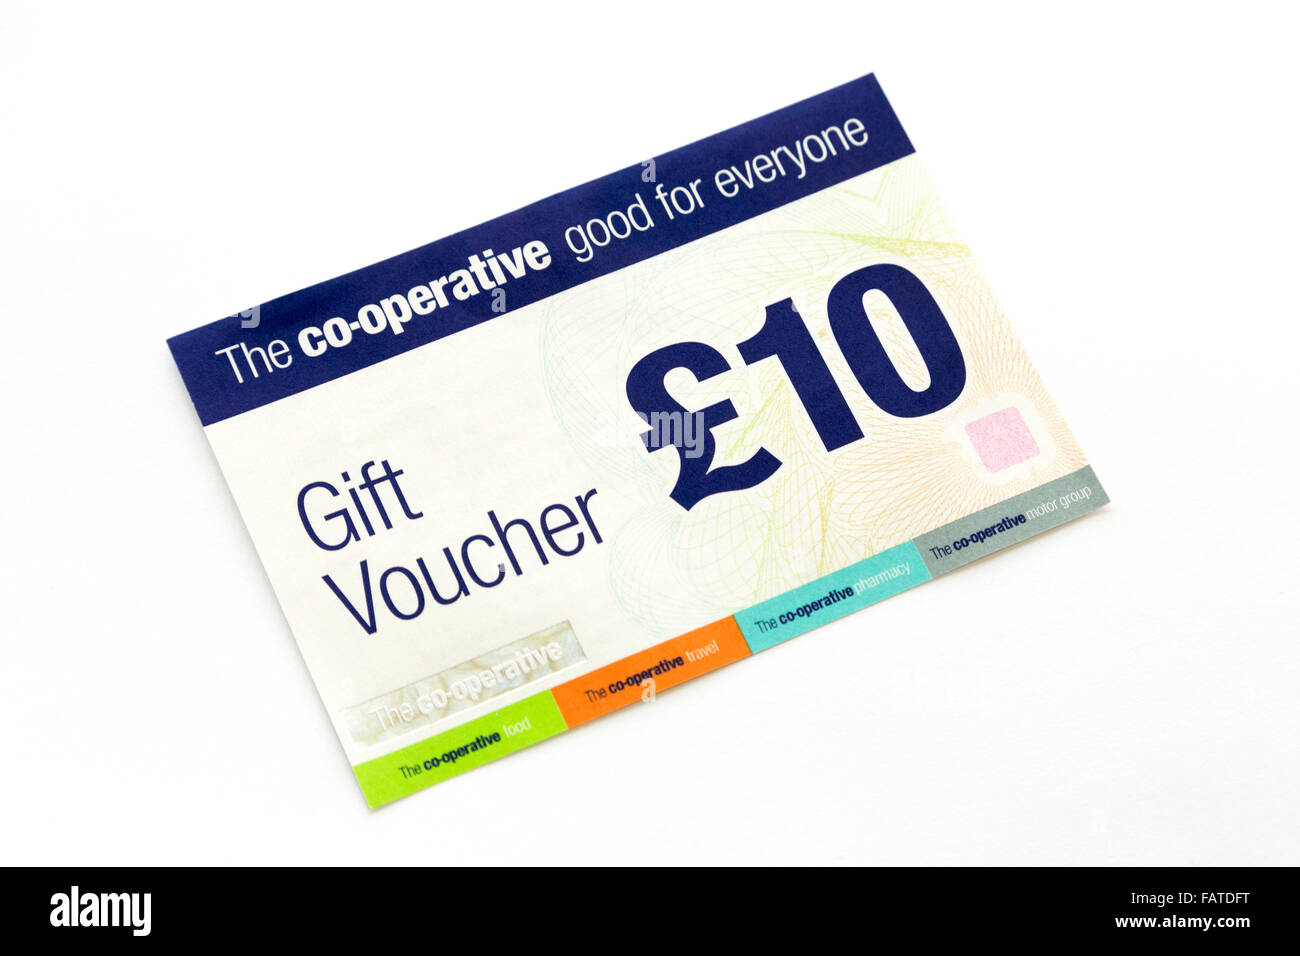 gift voucher for the co-operative stores Stock Photo